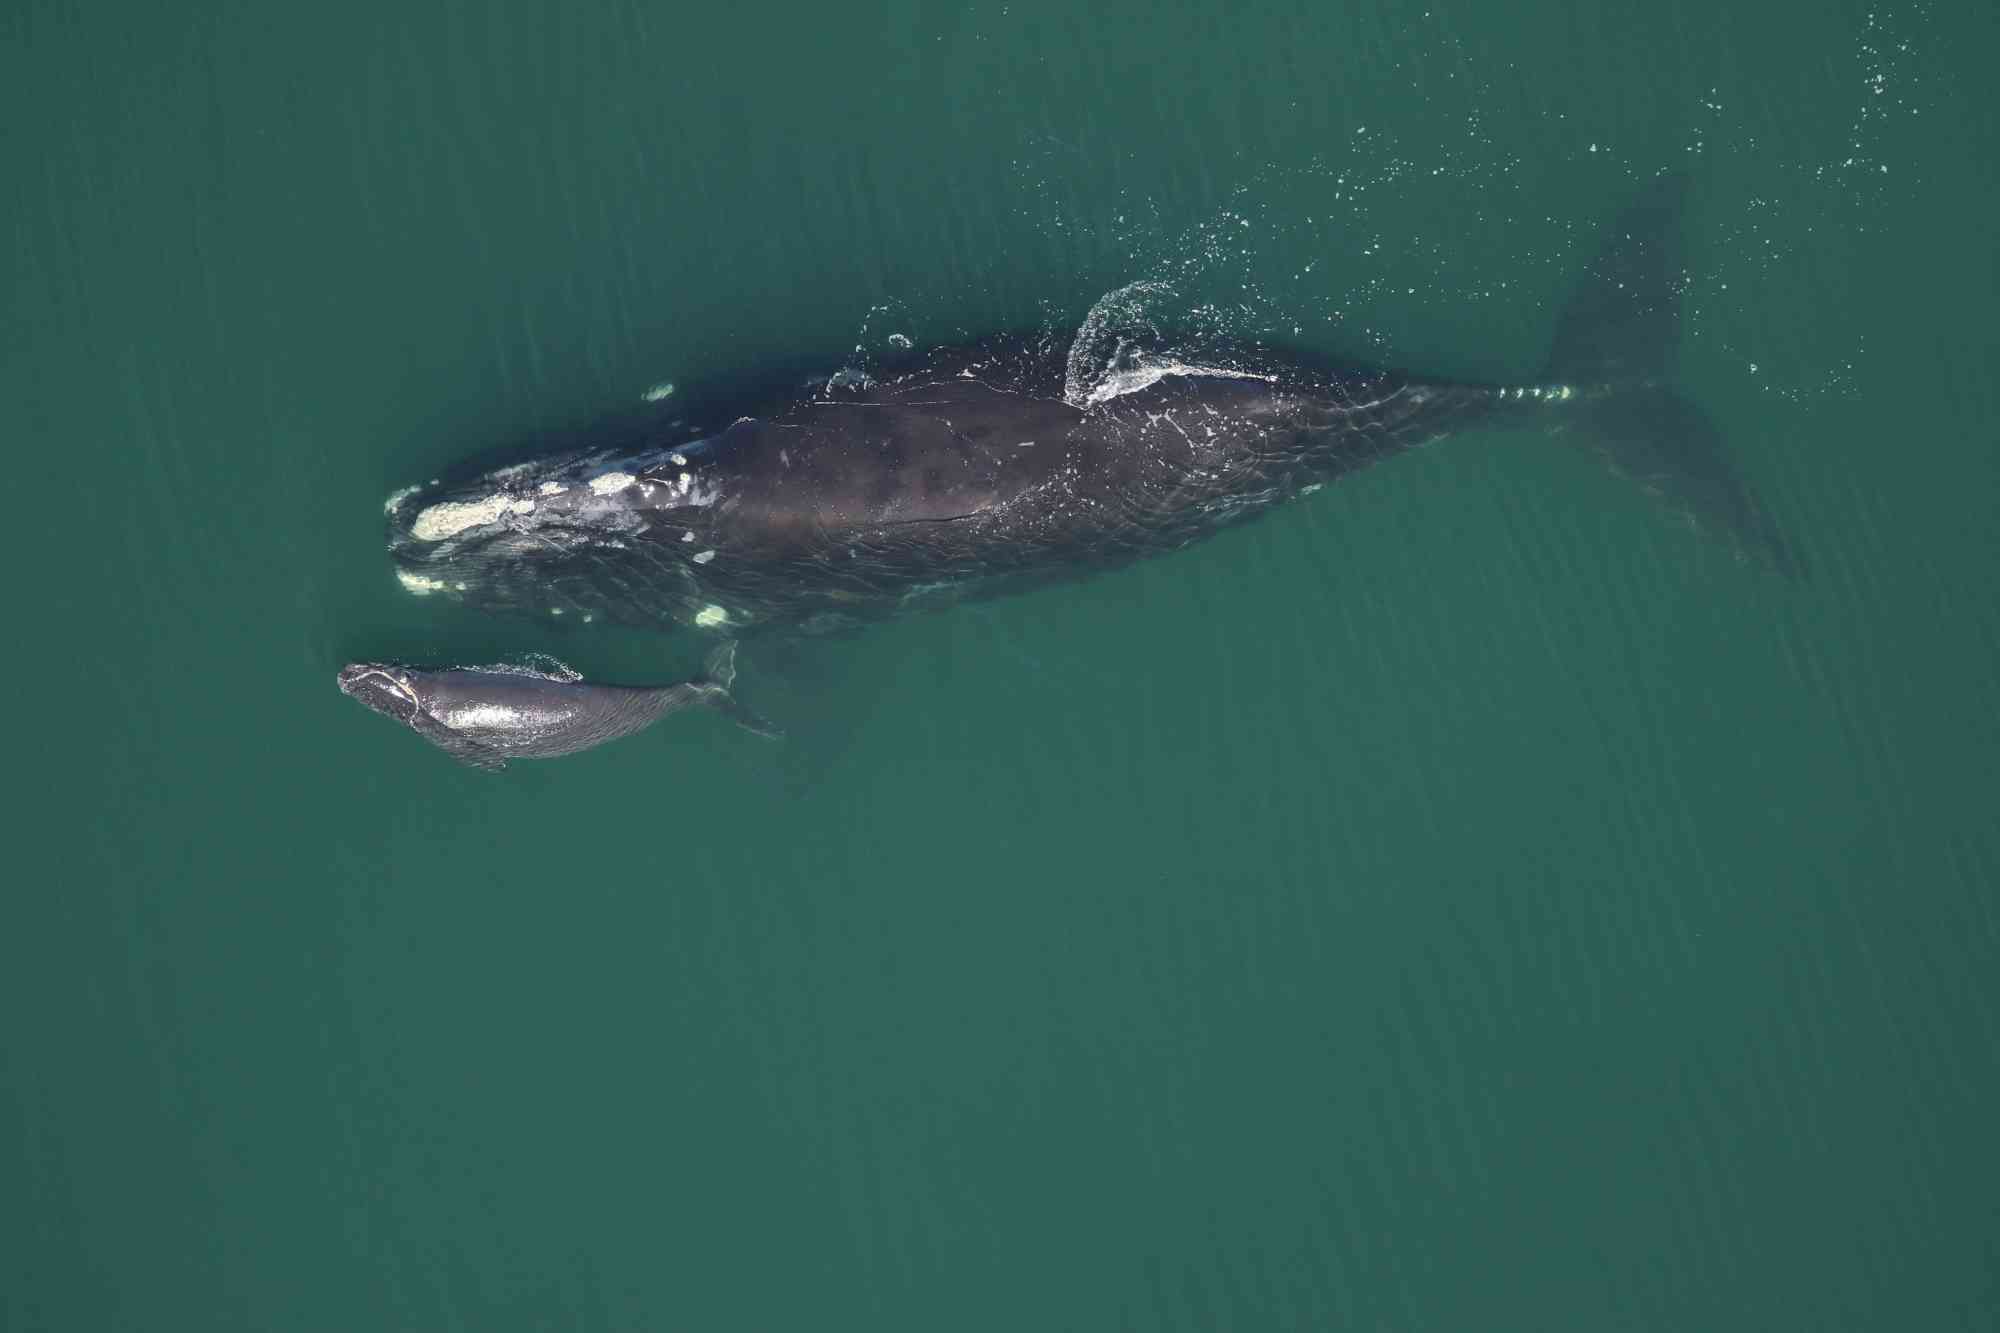 2016.02.01 - North Atlantic Right Whale with Calf - Florida Fish and Wildlife Conservation Commission, taken under NOAA research permit #15488